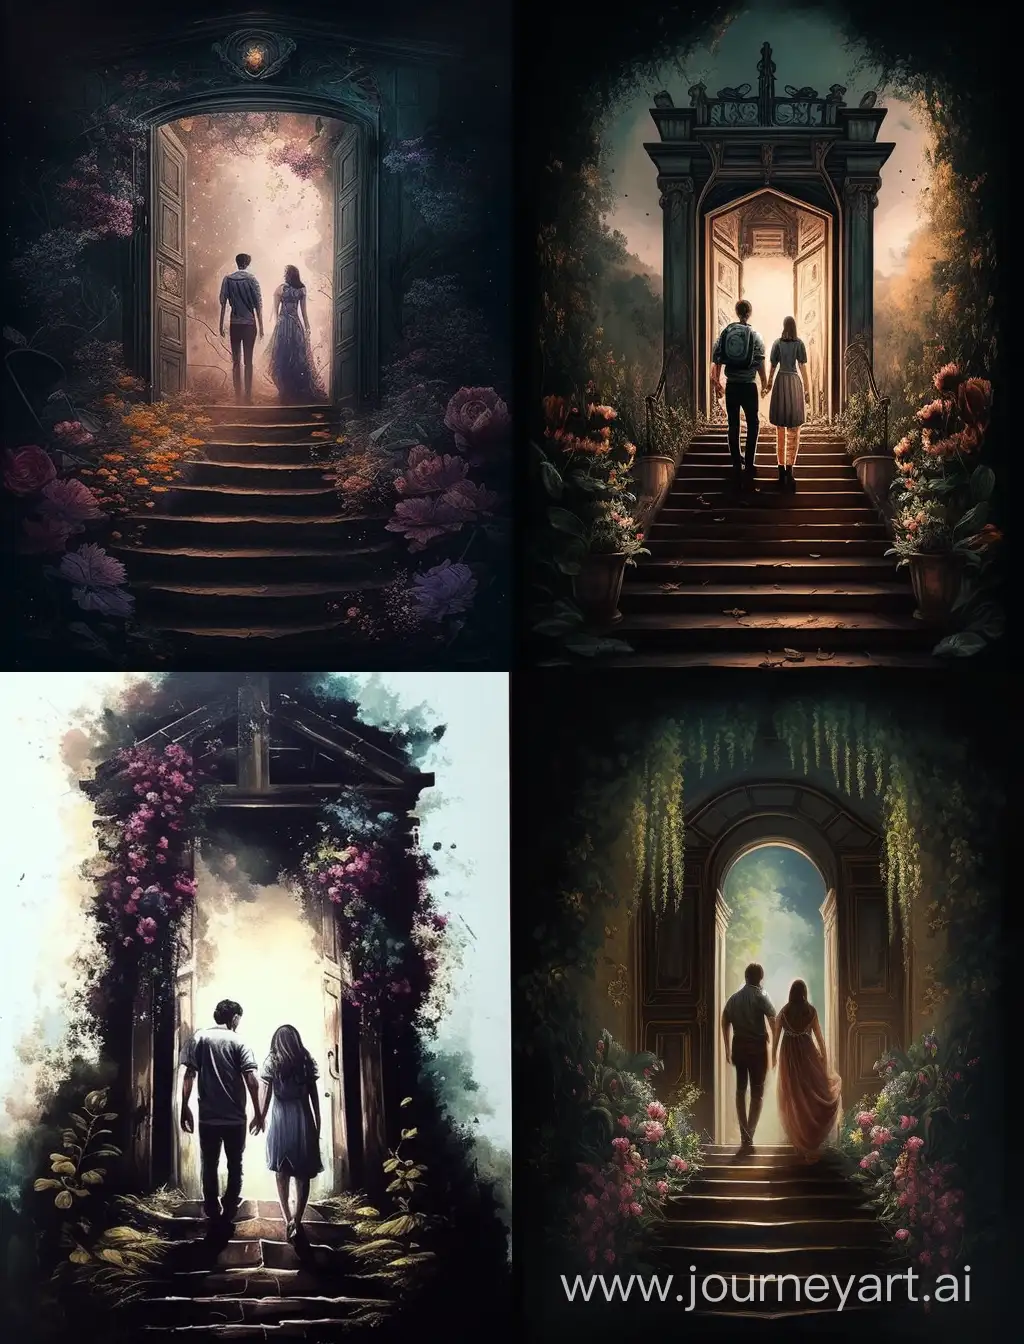 A woman and a man hold hands and walk up the stairs that lead up to the top. There is a door at the top. The surrounding area was decorated with flowers and light streamed through the door.